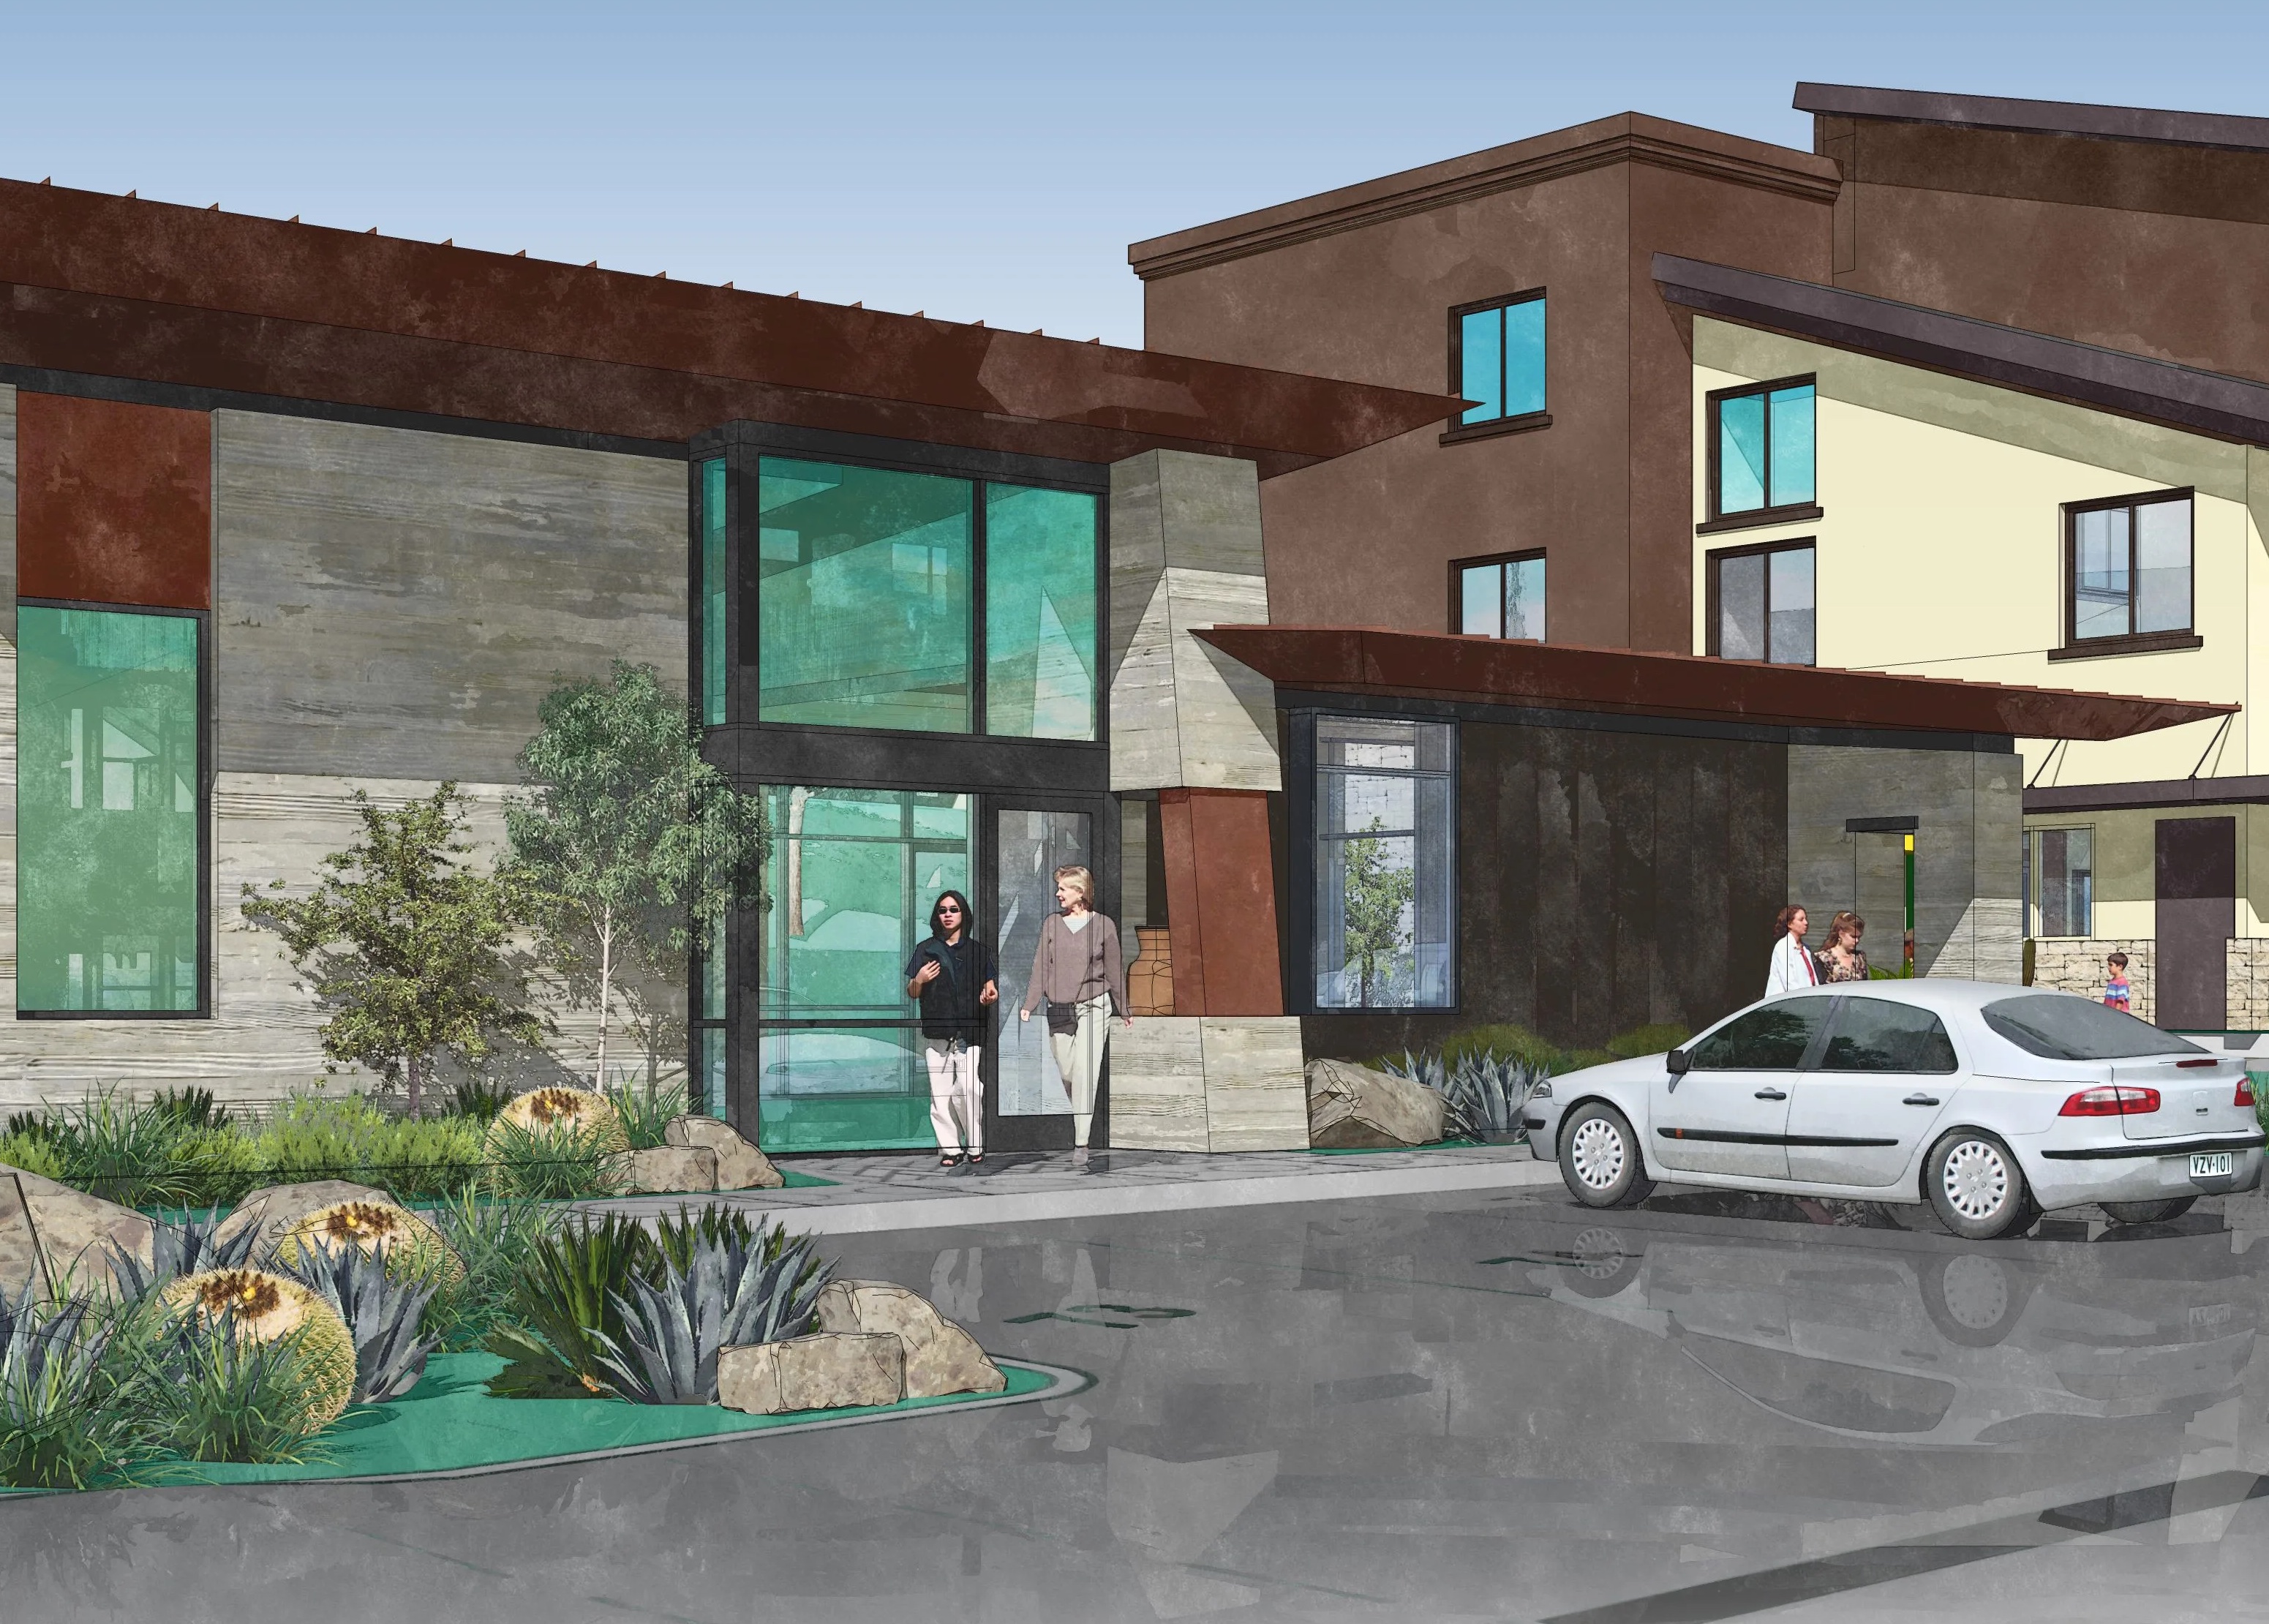 Affirmed Housing Breaks Ground on New 96-Unit Estrella Affordable Apartment Community in City of San Marcos, California 